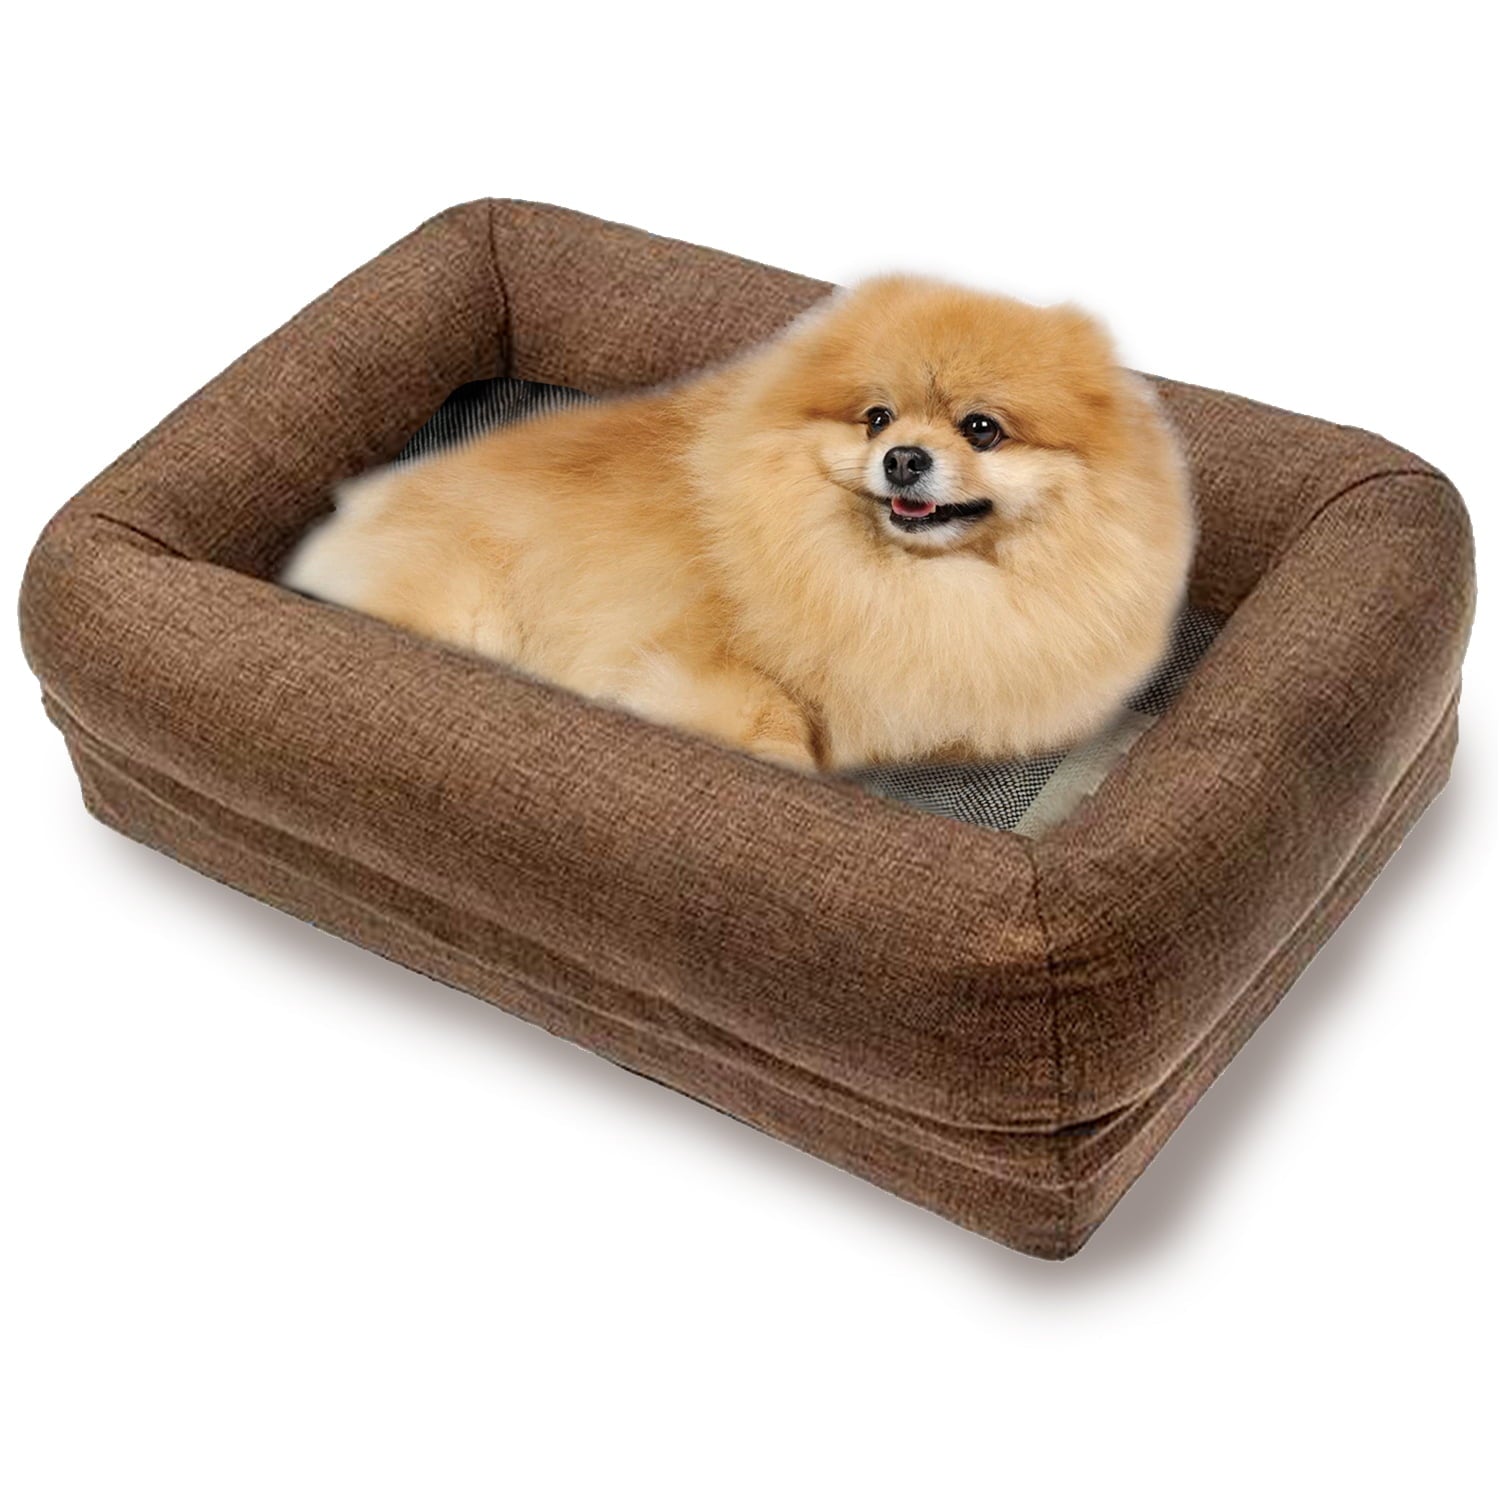 PinkSheep Waterproof Memory Foam Dog Bed Plush Orthopedic Sofa Pet Bed with Removable Cover for Small Medium Sized Cats Dogs